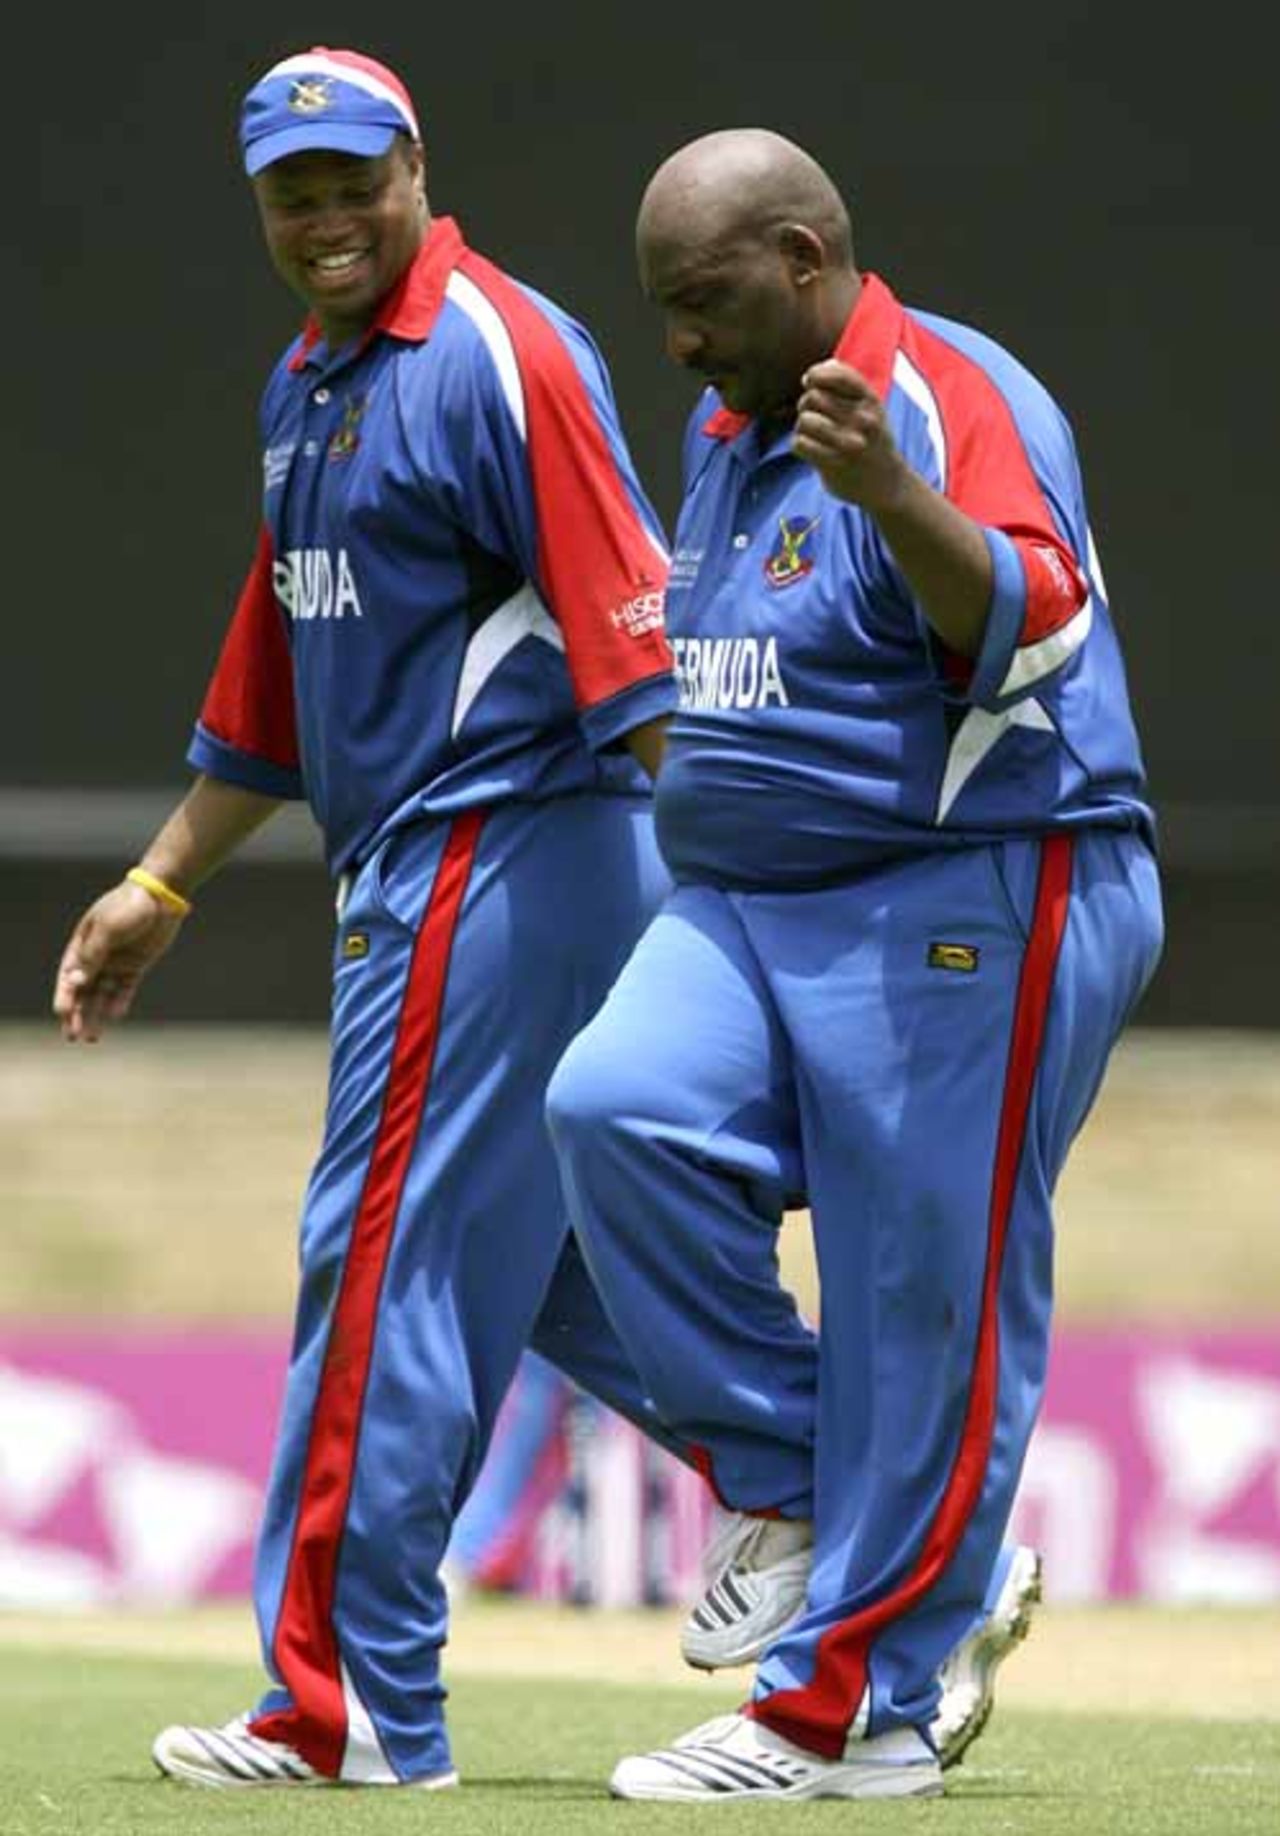 Dwayne Leverock, Bermuda's most colourful character, does a jig after picking up the wicket of Kumar Sangakkara, Bermuda v Sri Lanka, Group B, Port of Spain, March 15, 2007